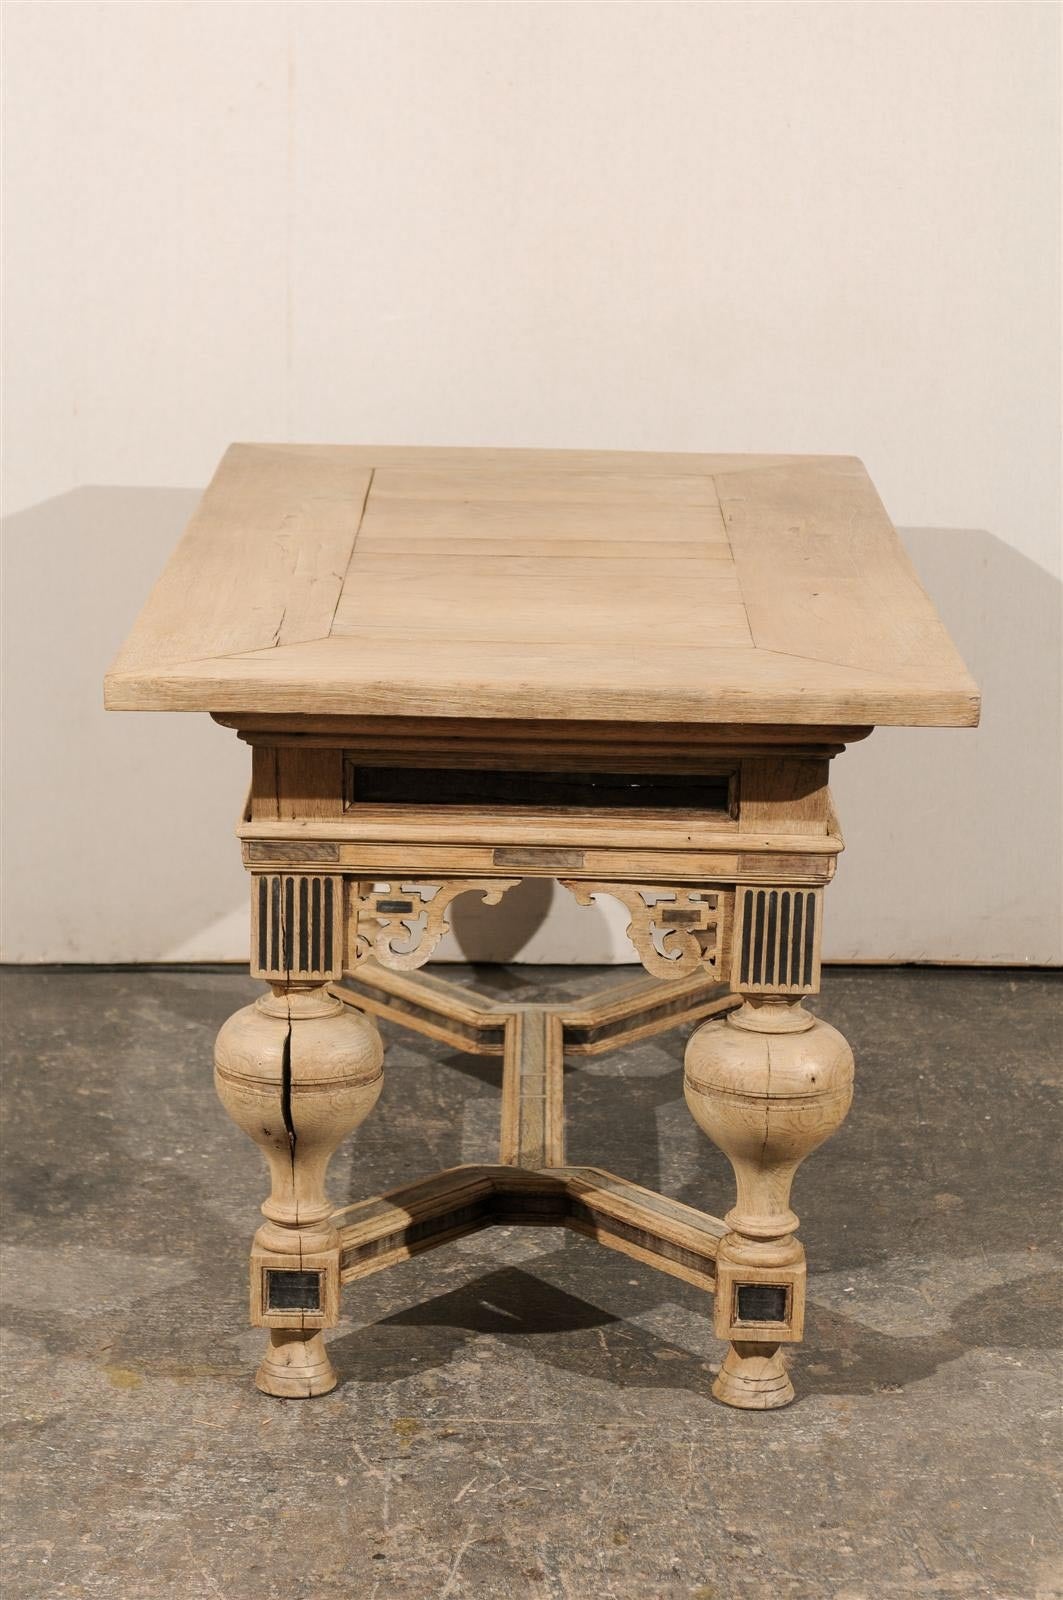 A Very Handsome, Early 19th C. Swedish Baroque Style Bleached Wood Table or Desk 4